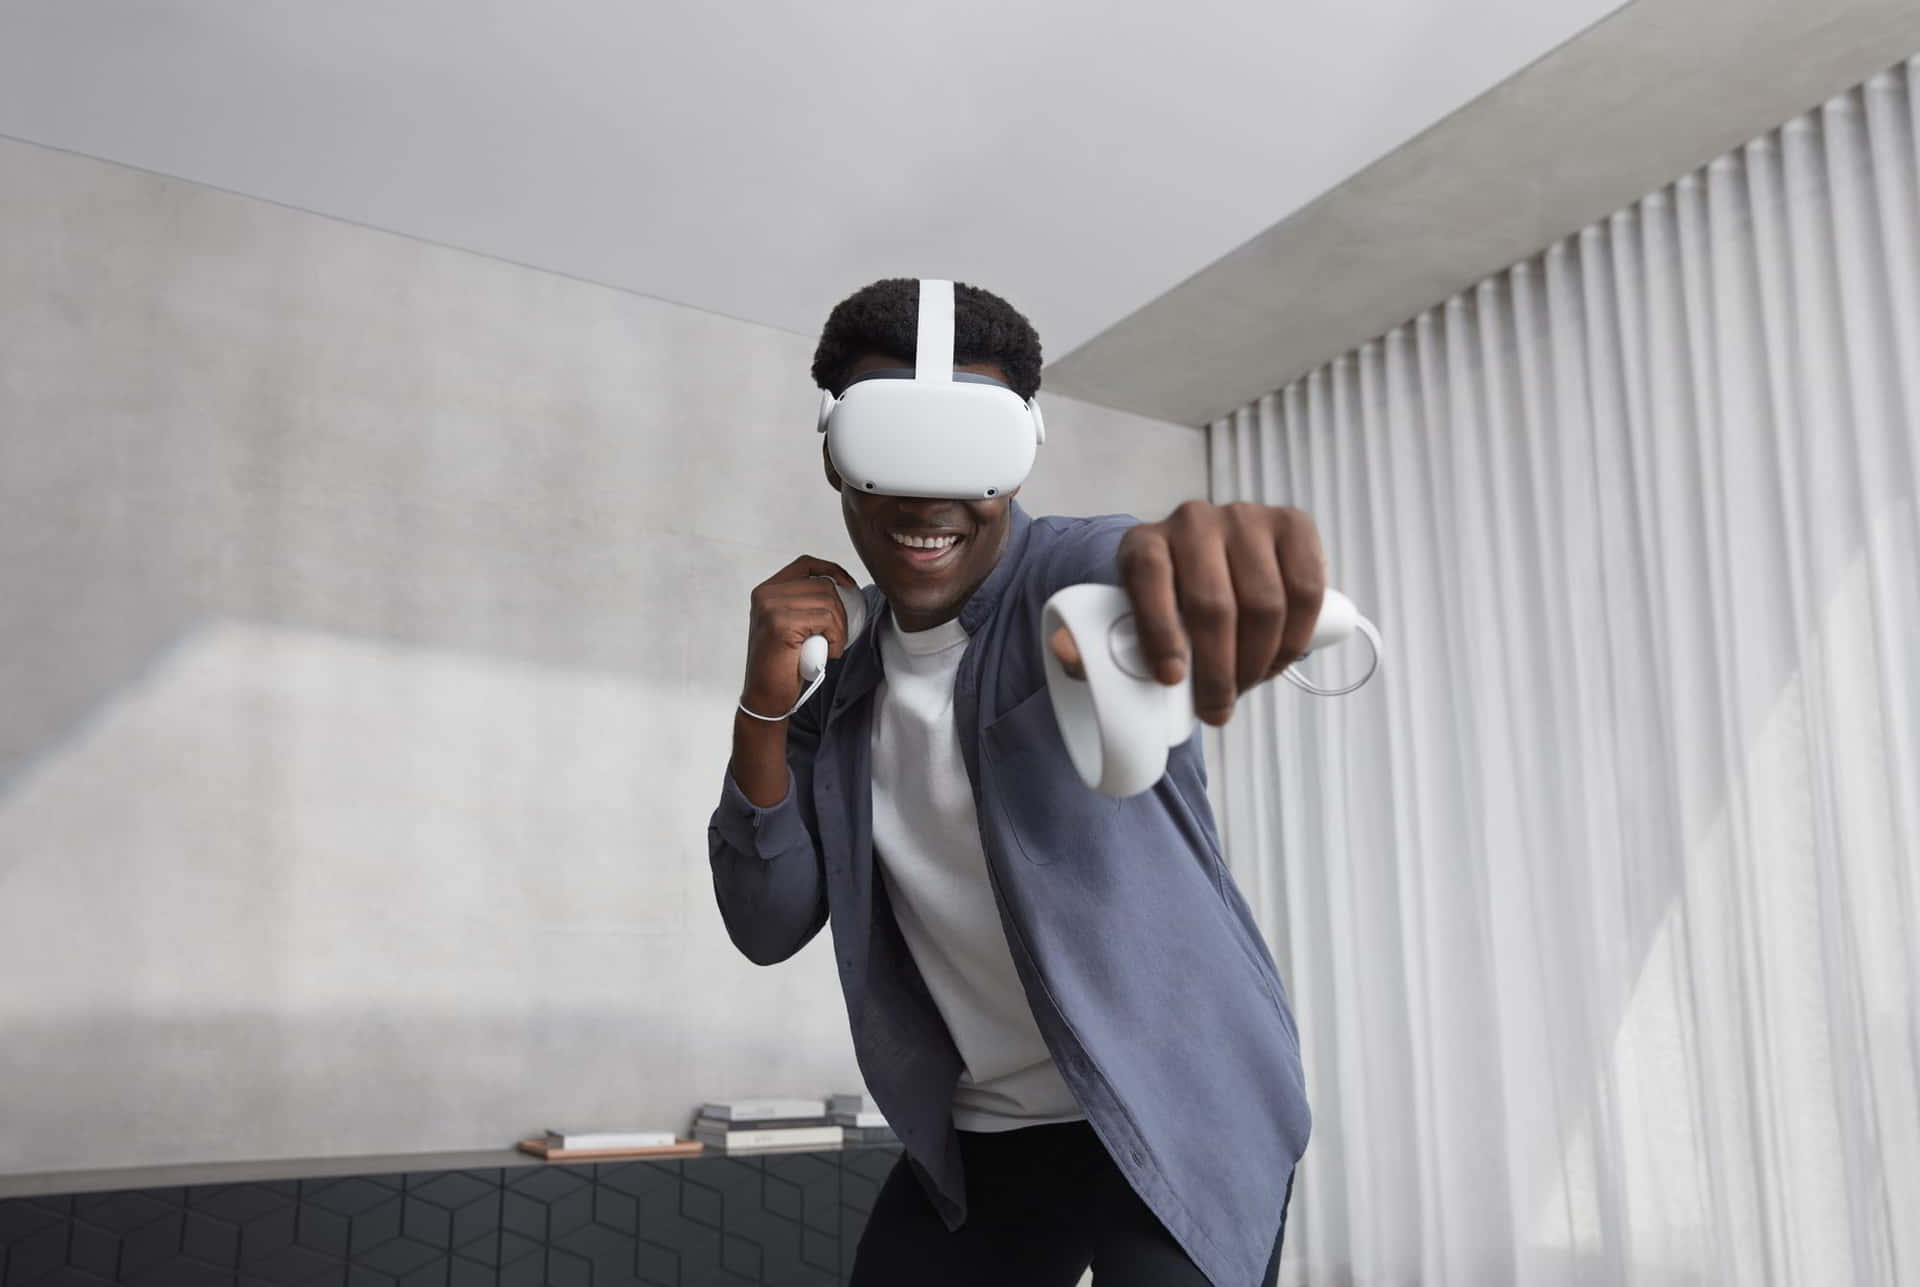 Step into the next generation of virtual reality with the Oculus Quest 2.